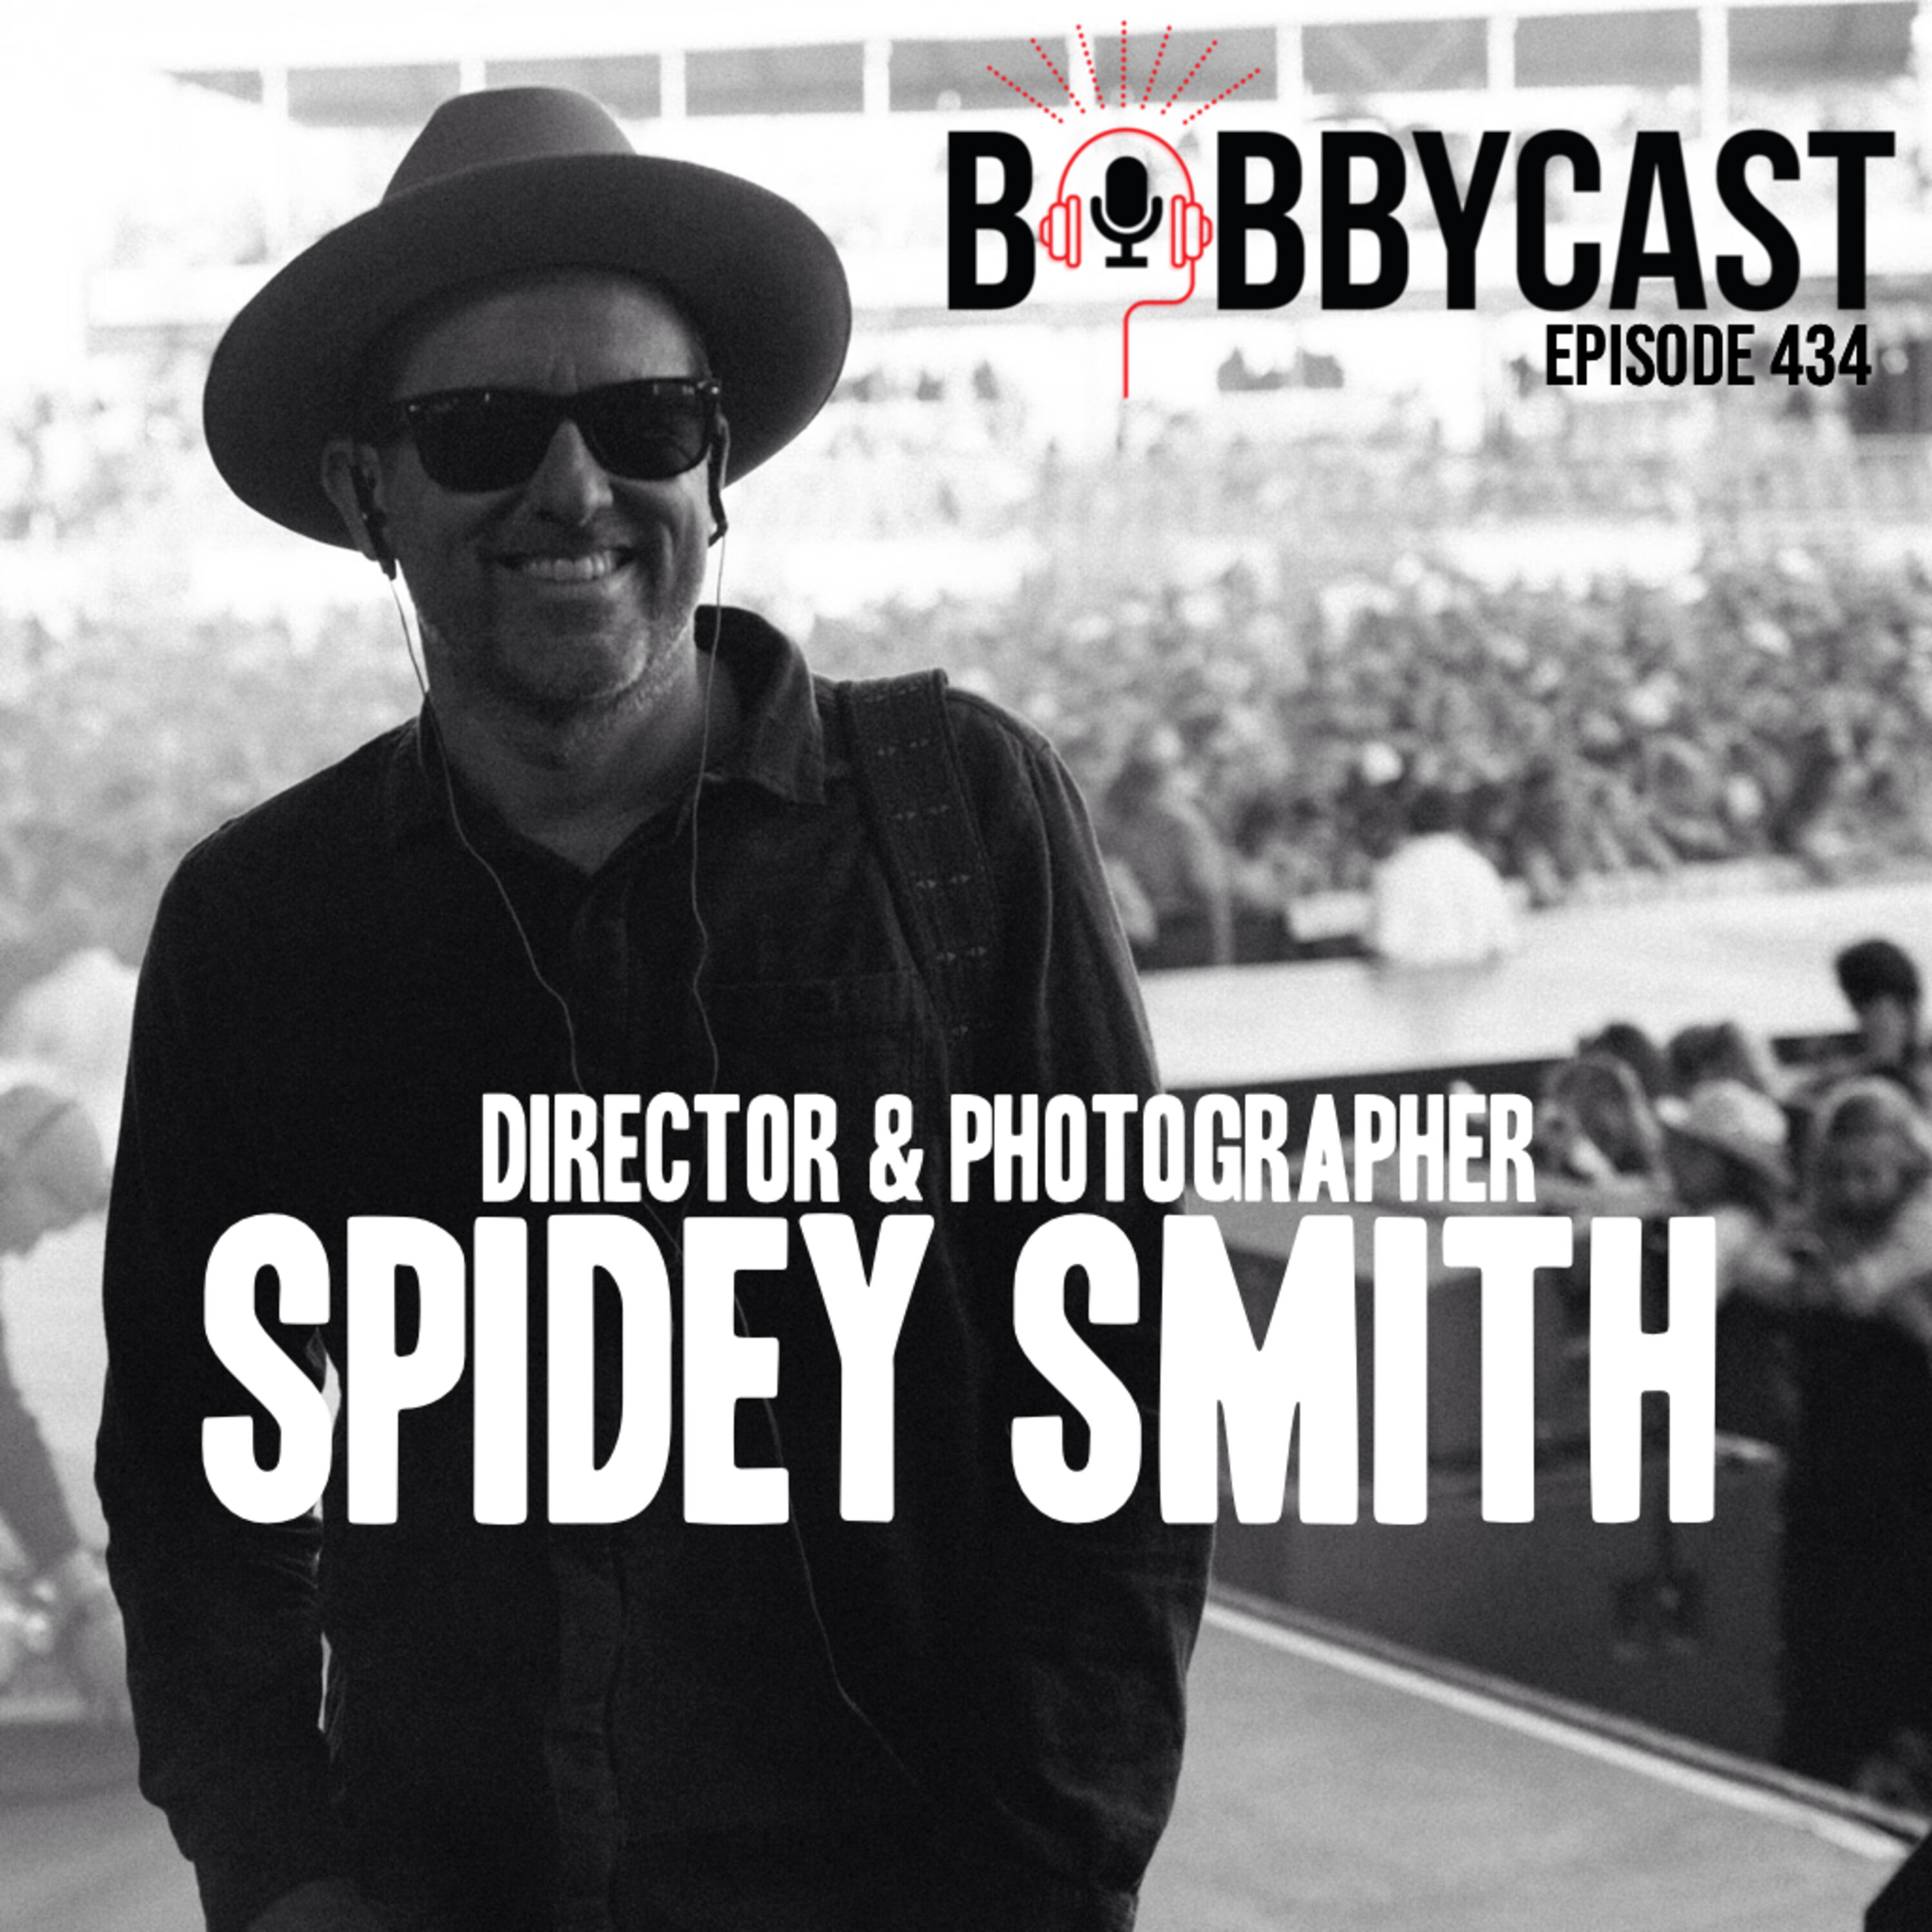 #434 - Director & Photographer Spidey Smith on Shooting Morgan Wallen’s Album Cover + Directing Eminem in a Music Video & The Joke He Played On Him + How Jason Aldean Gave Him the Nickname